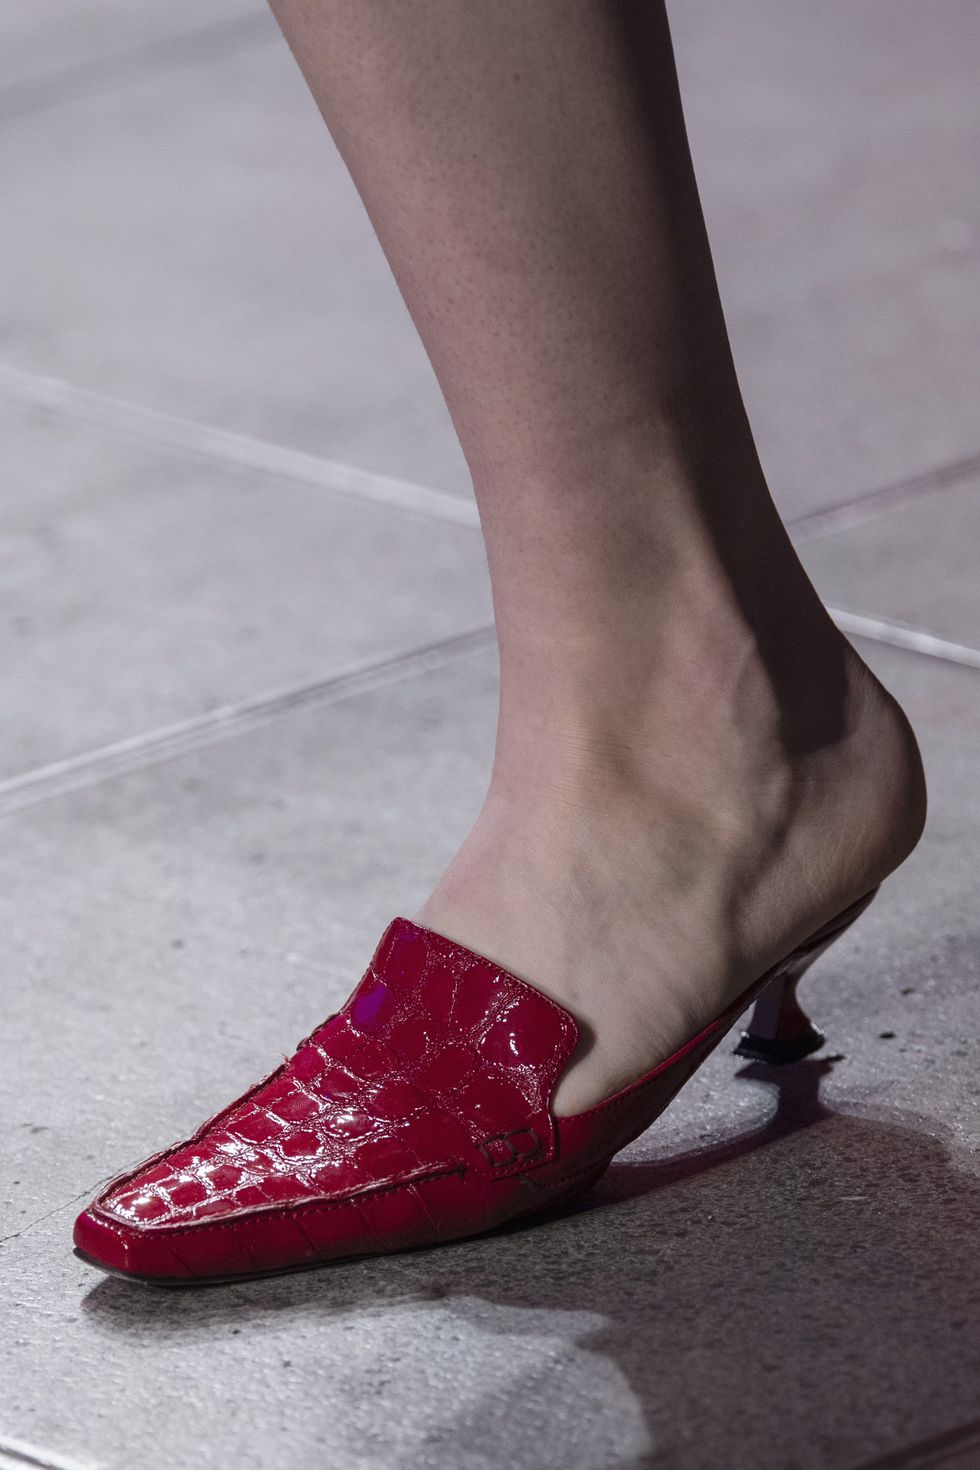 Footwear, Shoe, Red, Ankle, Human leg, Leg, Fashion, Pink, Joint, Haute couture, 